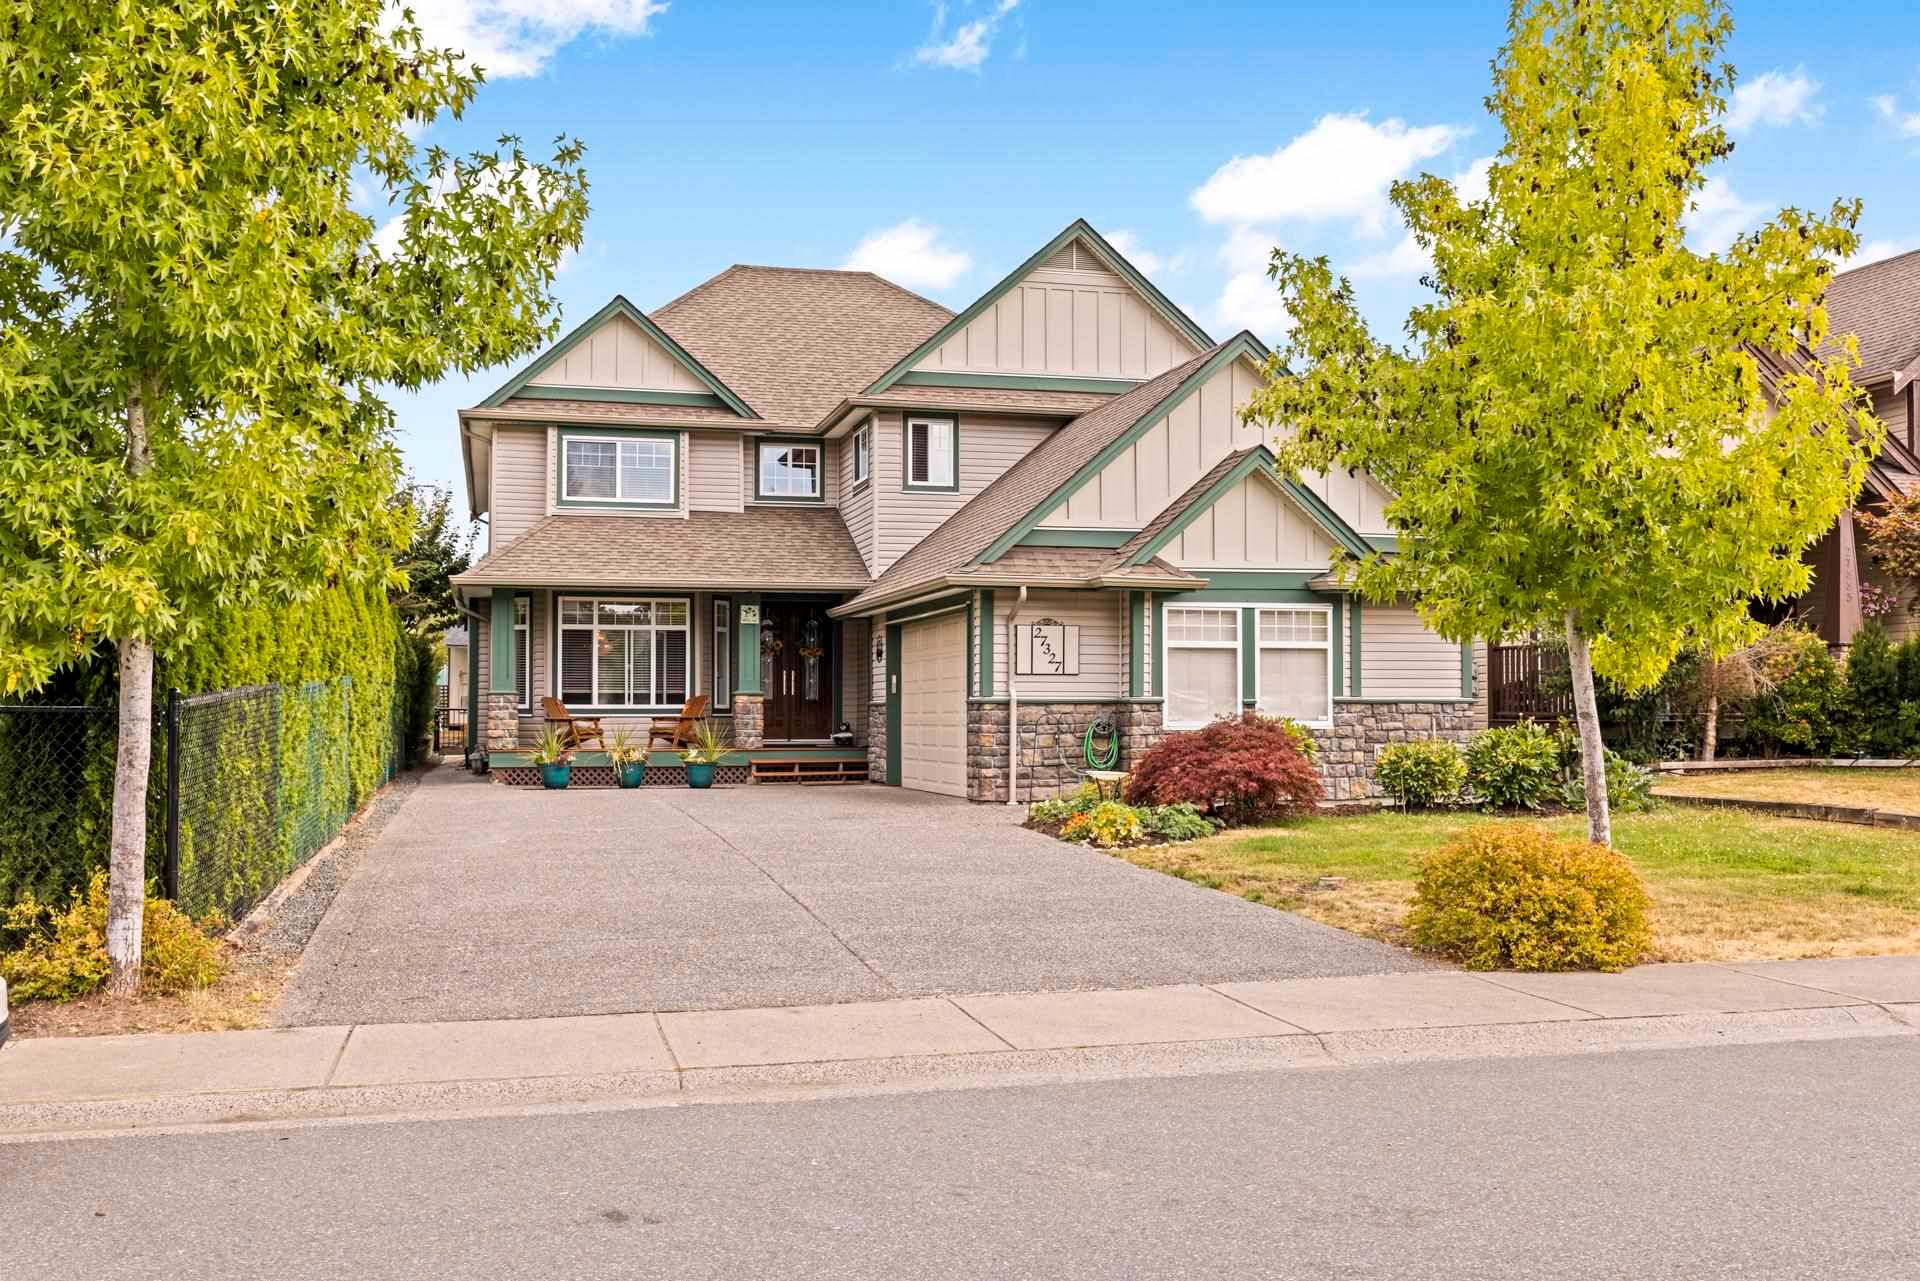 Main Photo: 27327 33A AVENUE in : Aldergrove Langley House for sale : MLS®# R2607475